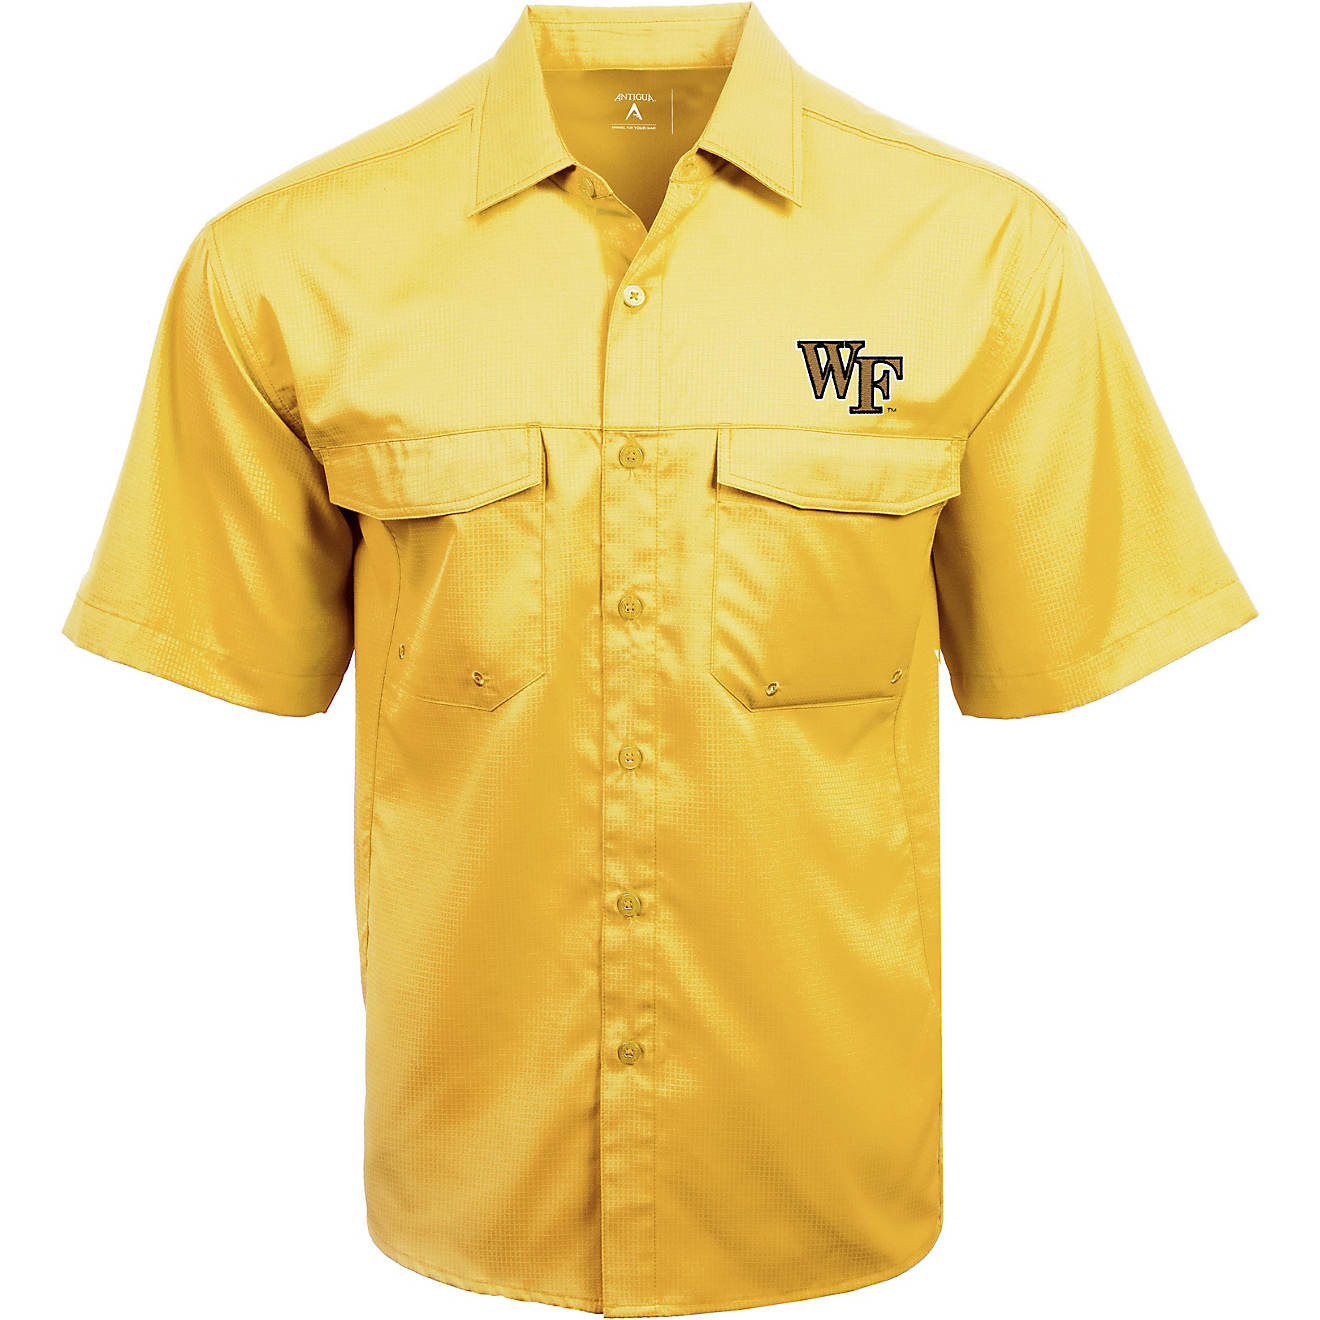 Antigua Men's Wake Forest University Game Day Fishing Shirt                                                                      - view number 1